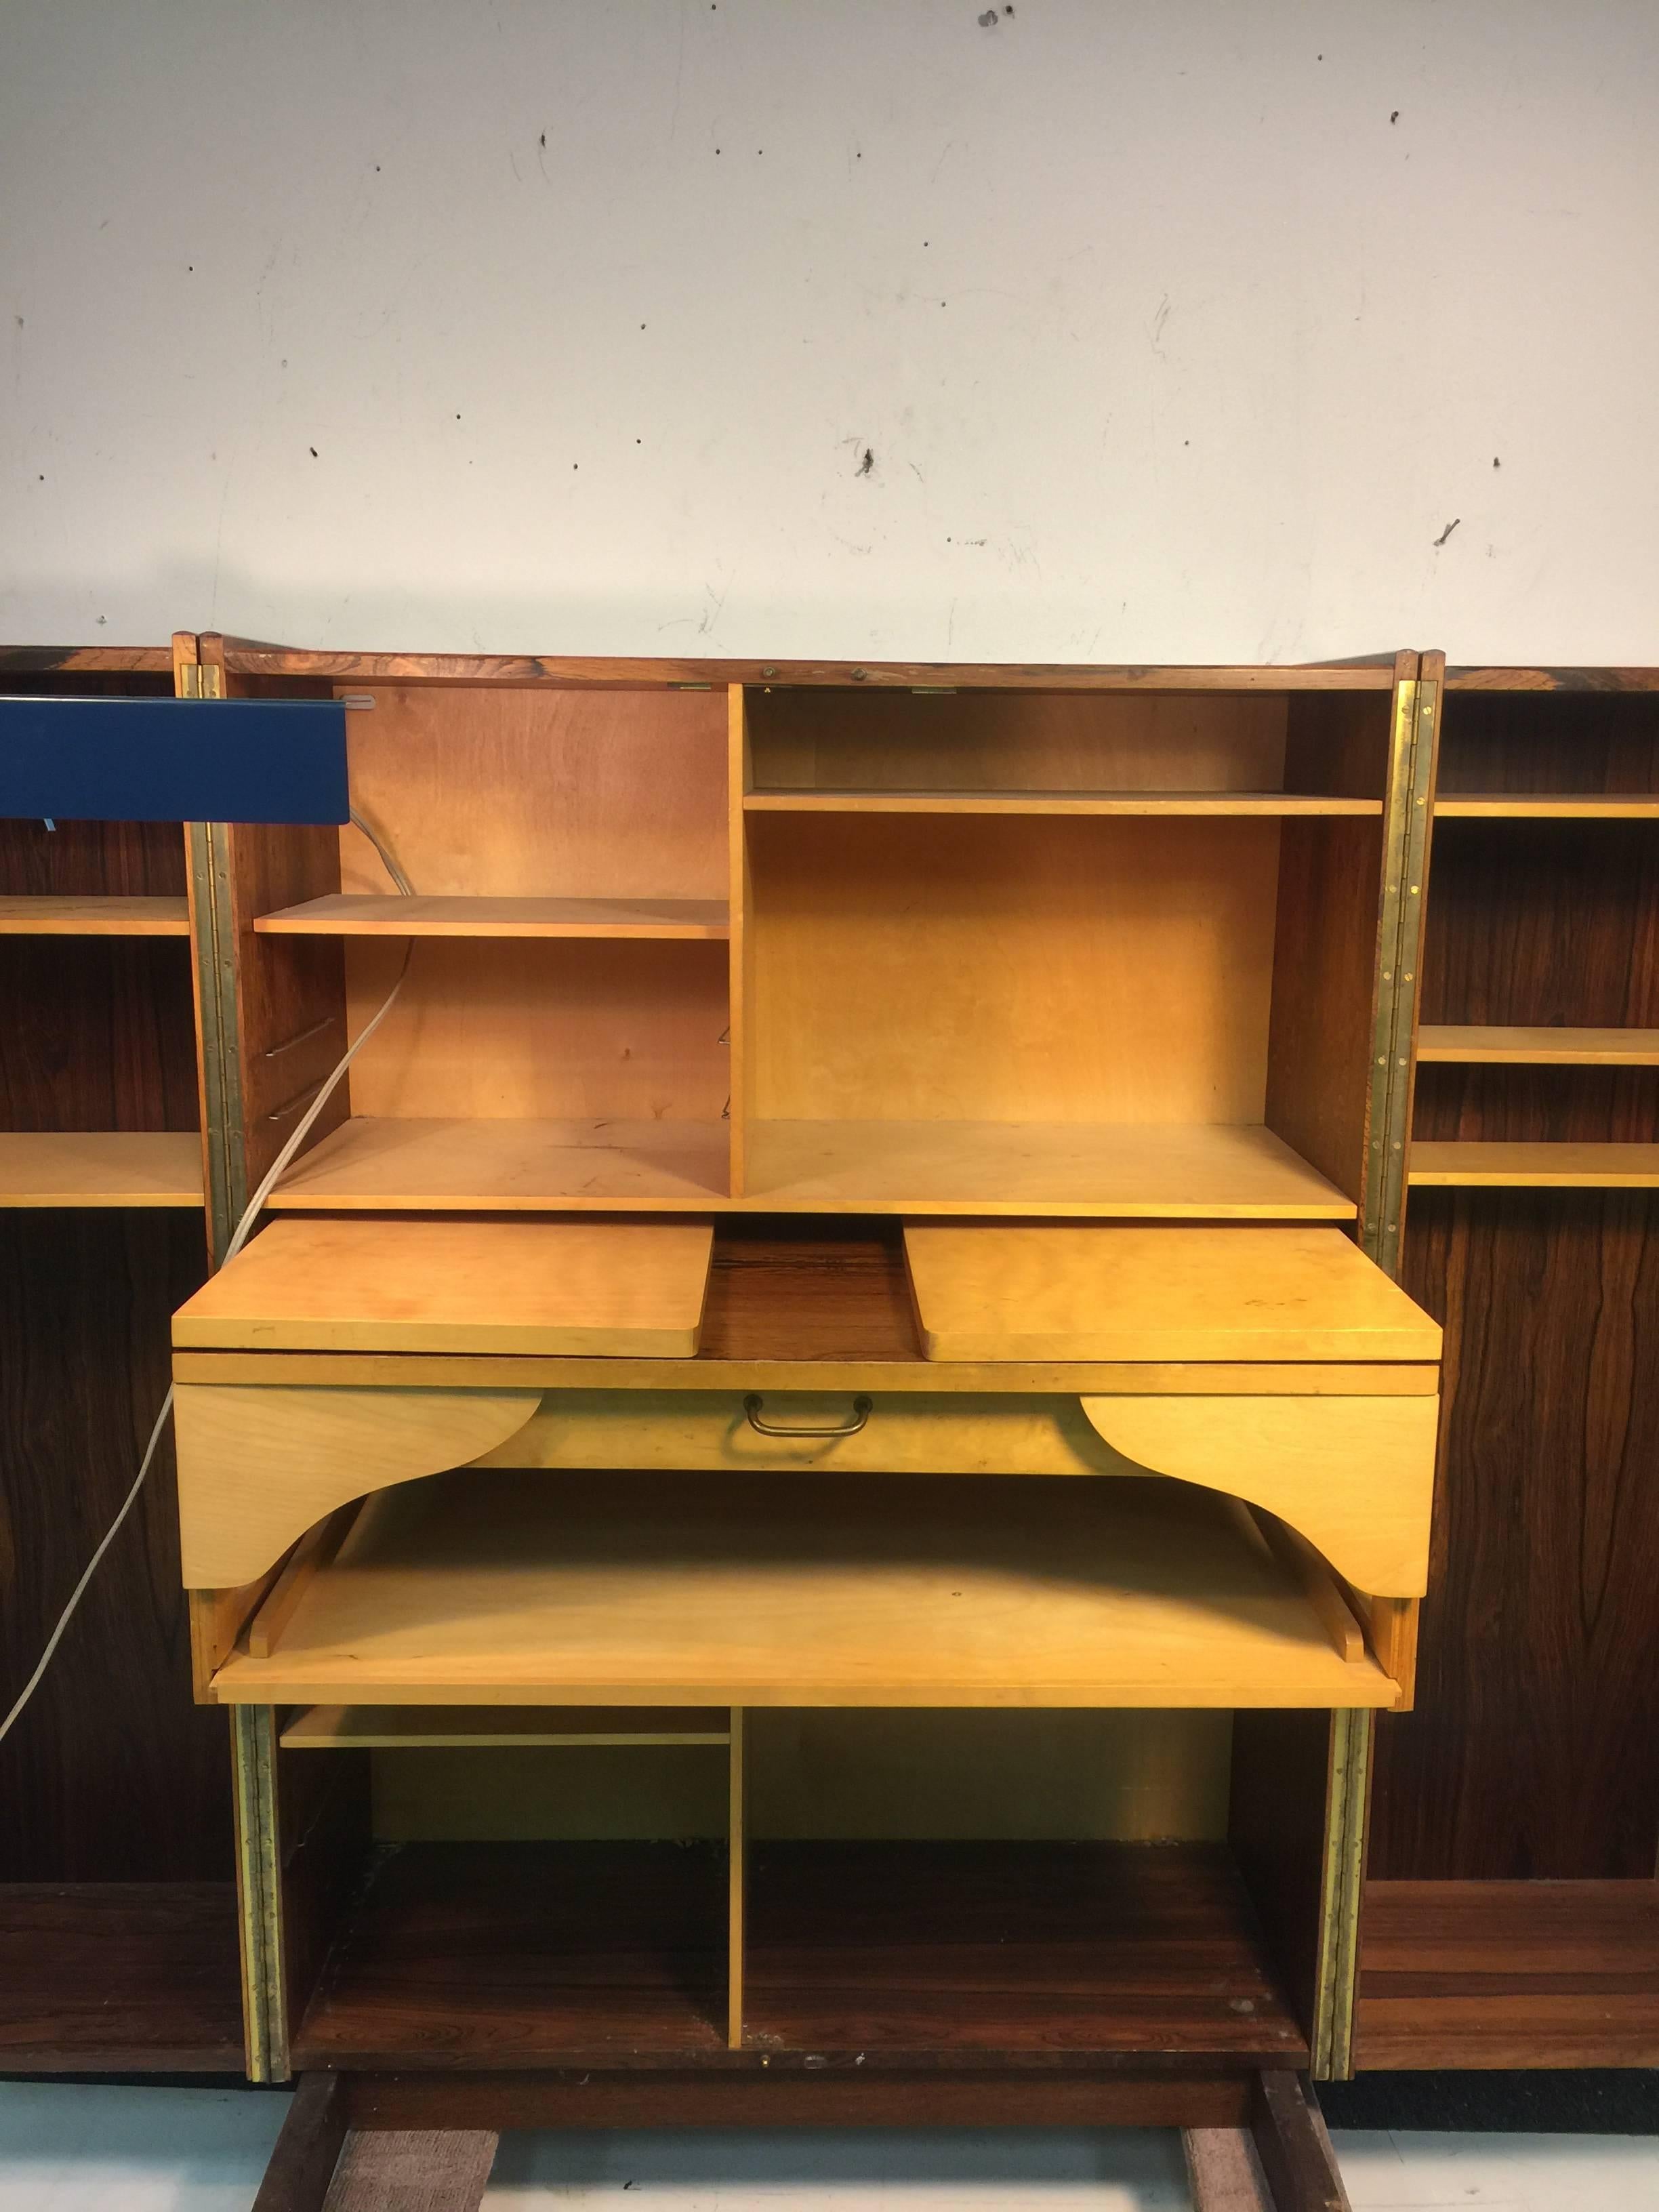 Incredible “Magic Box” Secrecy Desk by Mumenthaler and Meier In Good Condition For Sale In Mount Penn, PA